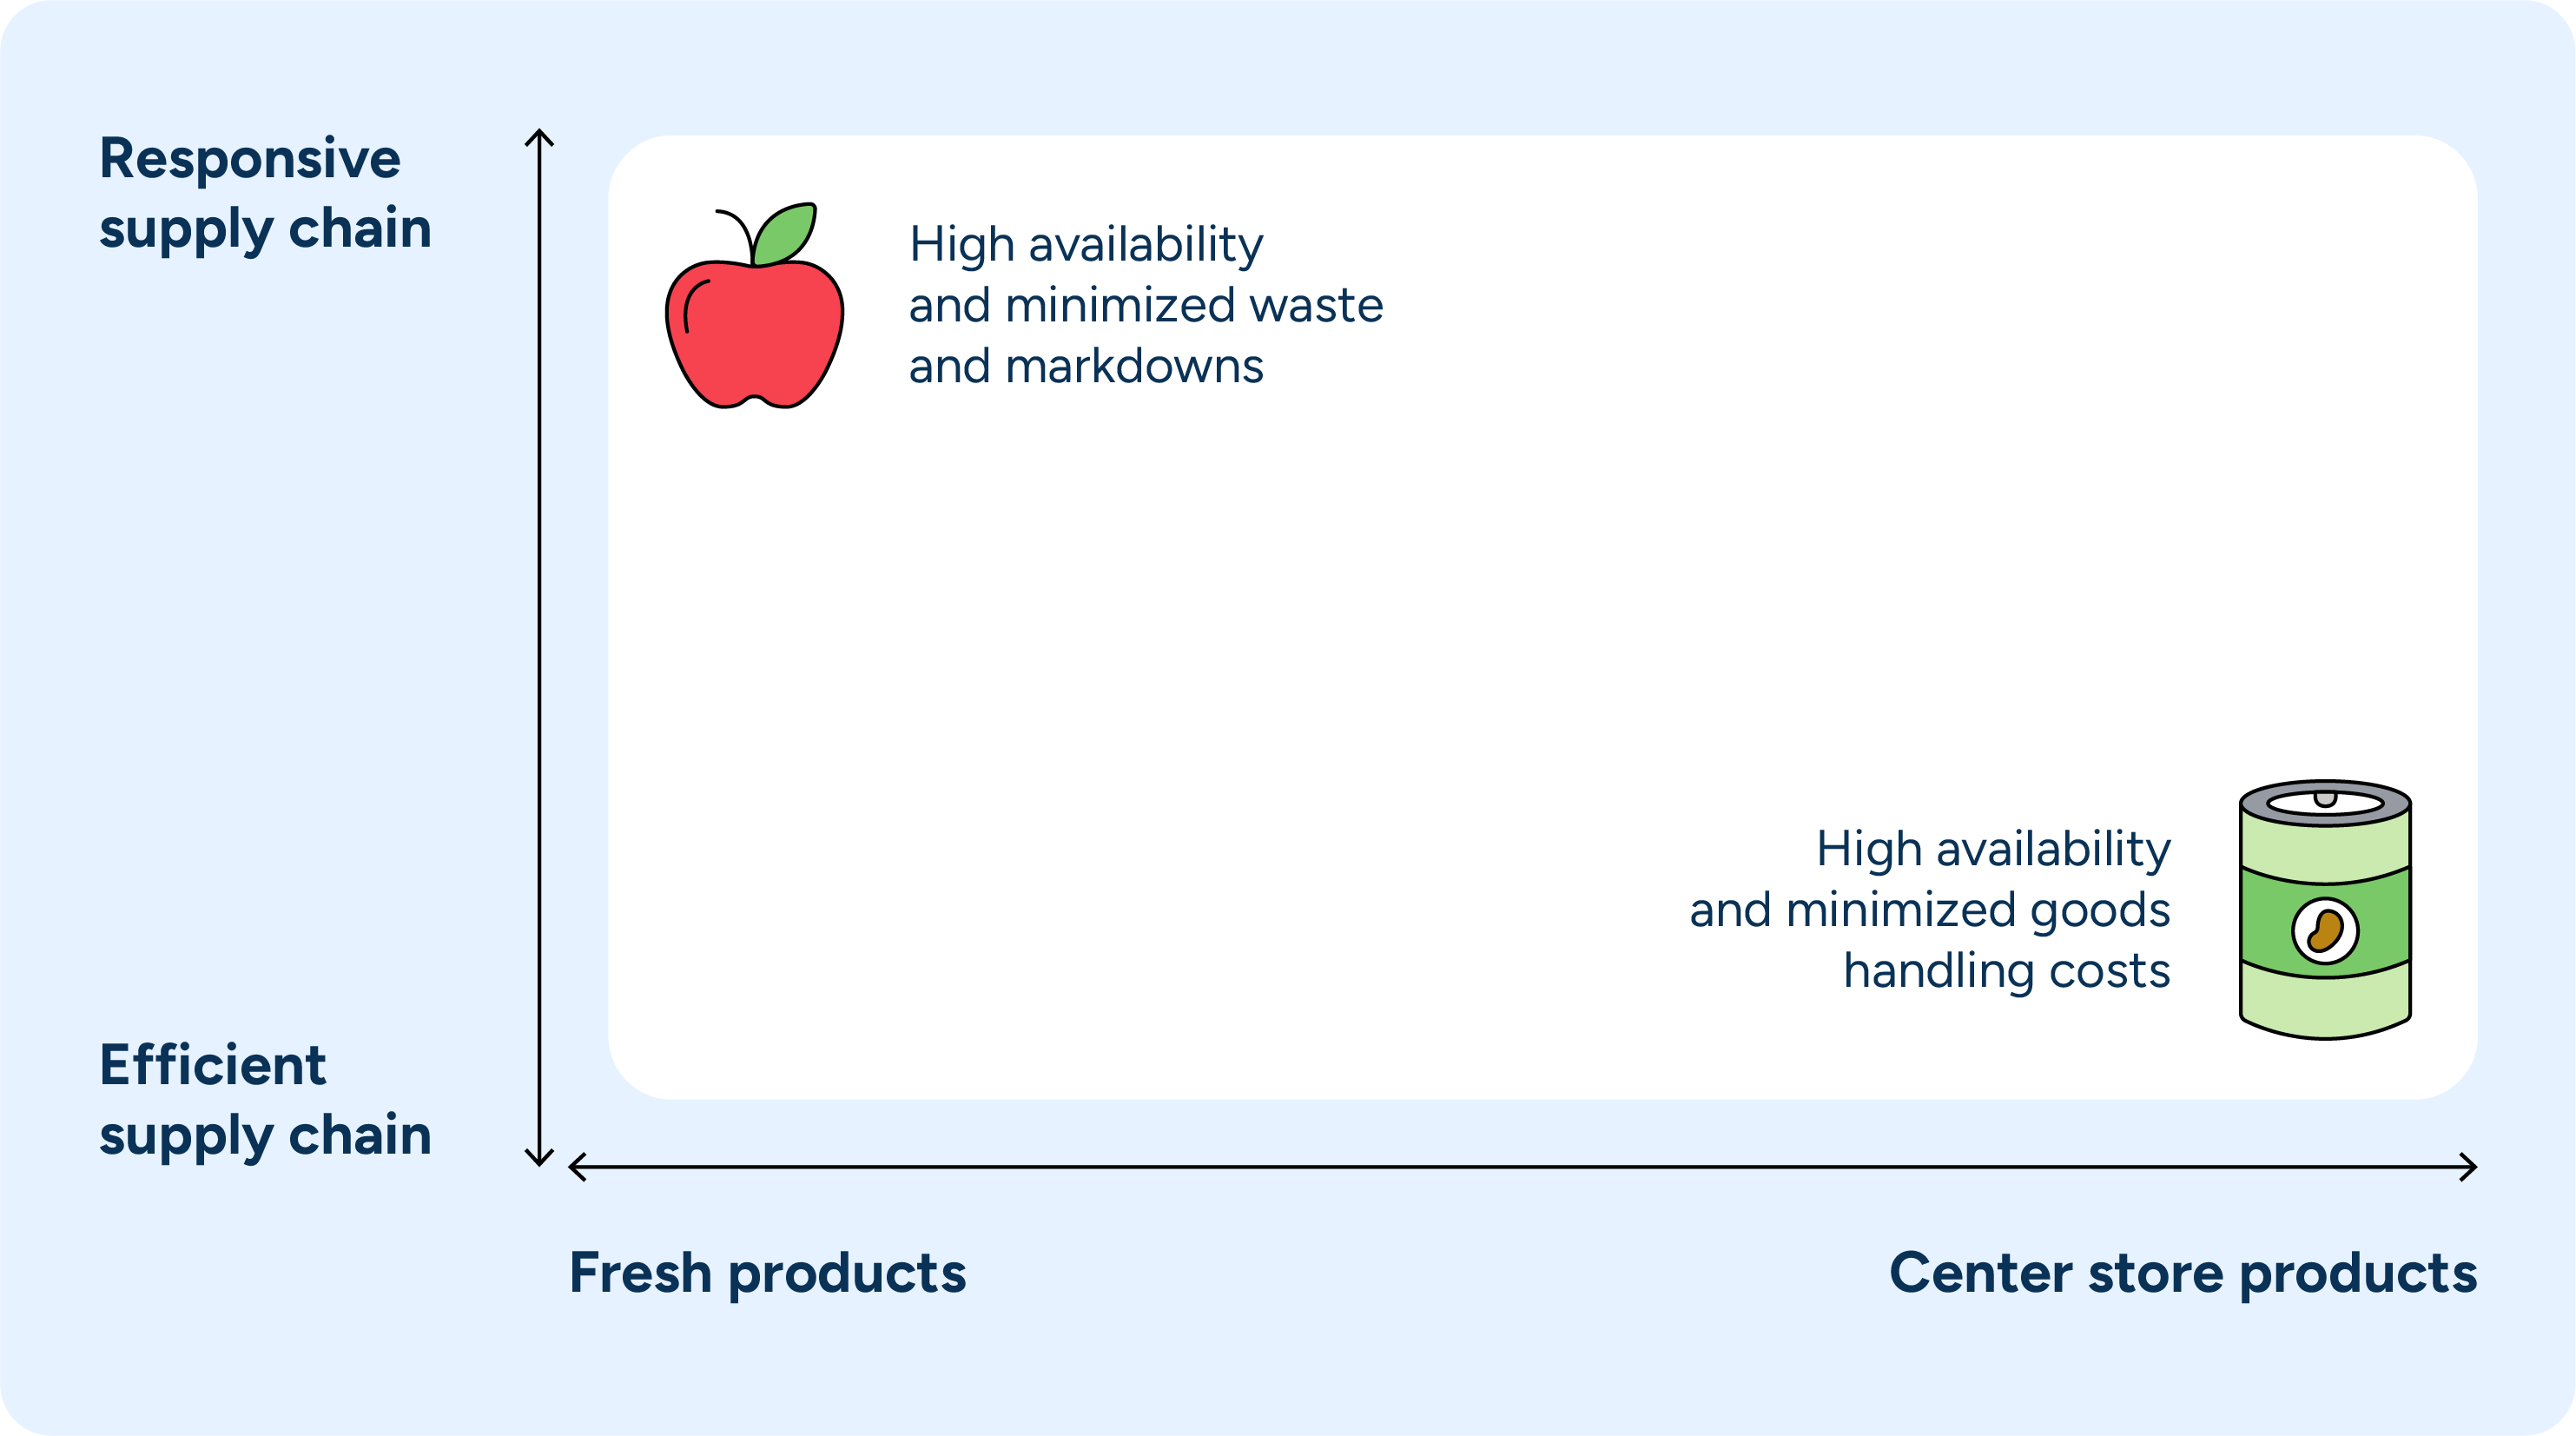 A chart showing the difference between fresh and center store products in the supply chain.